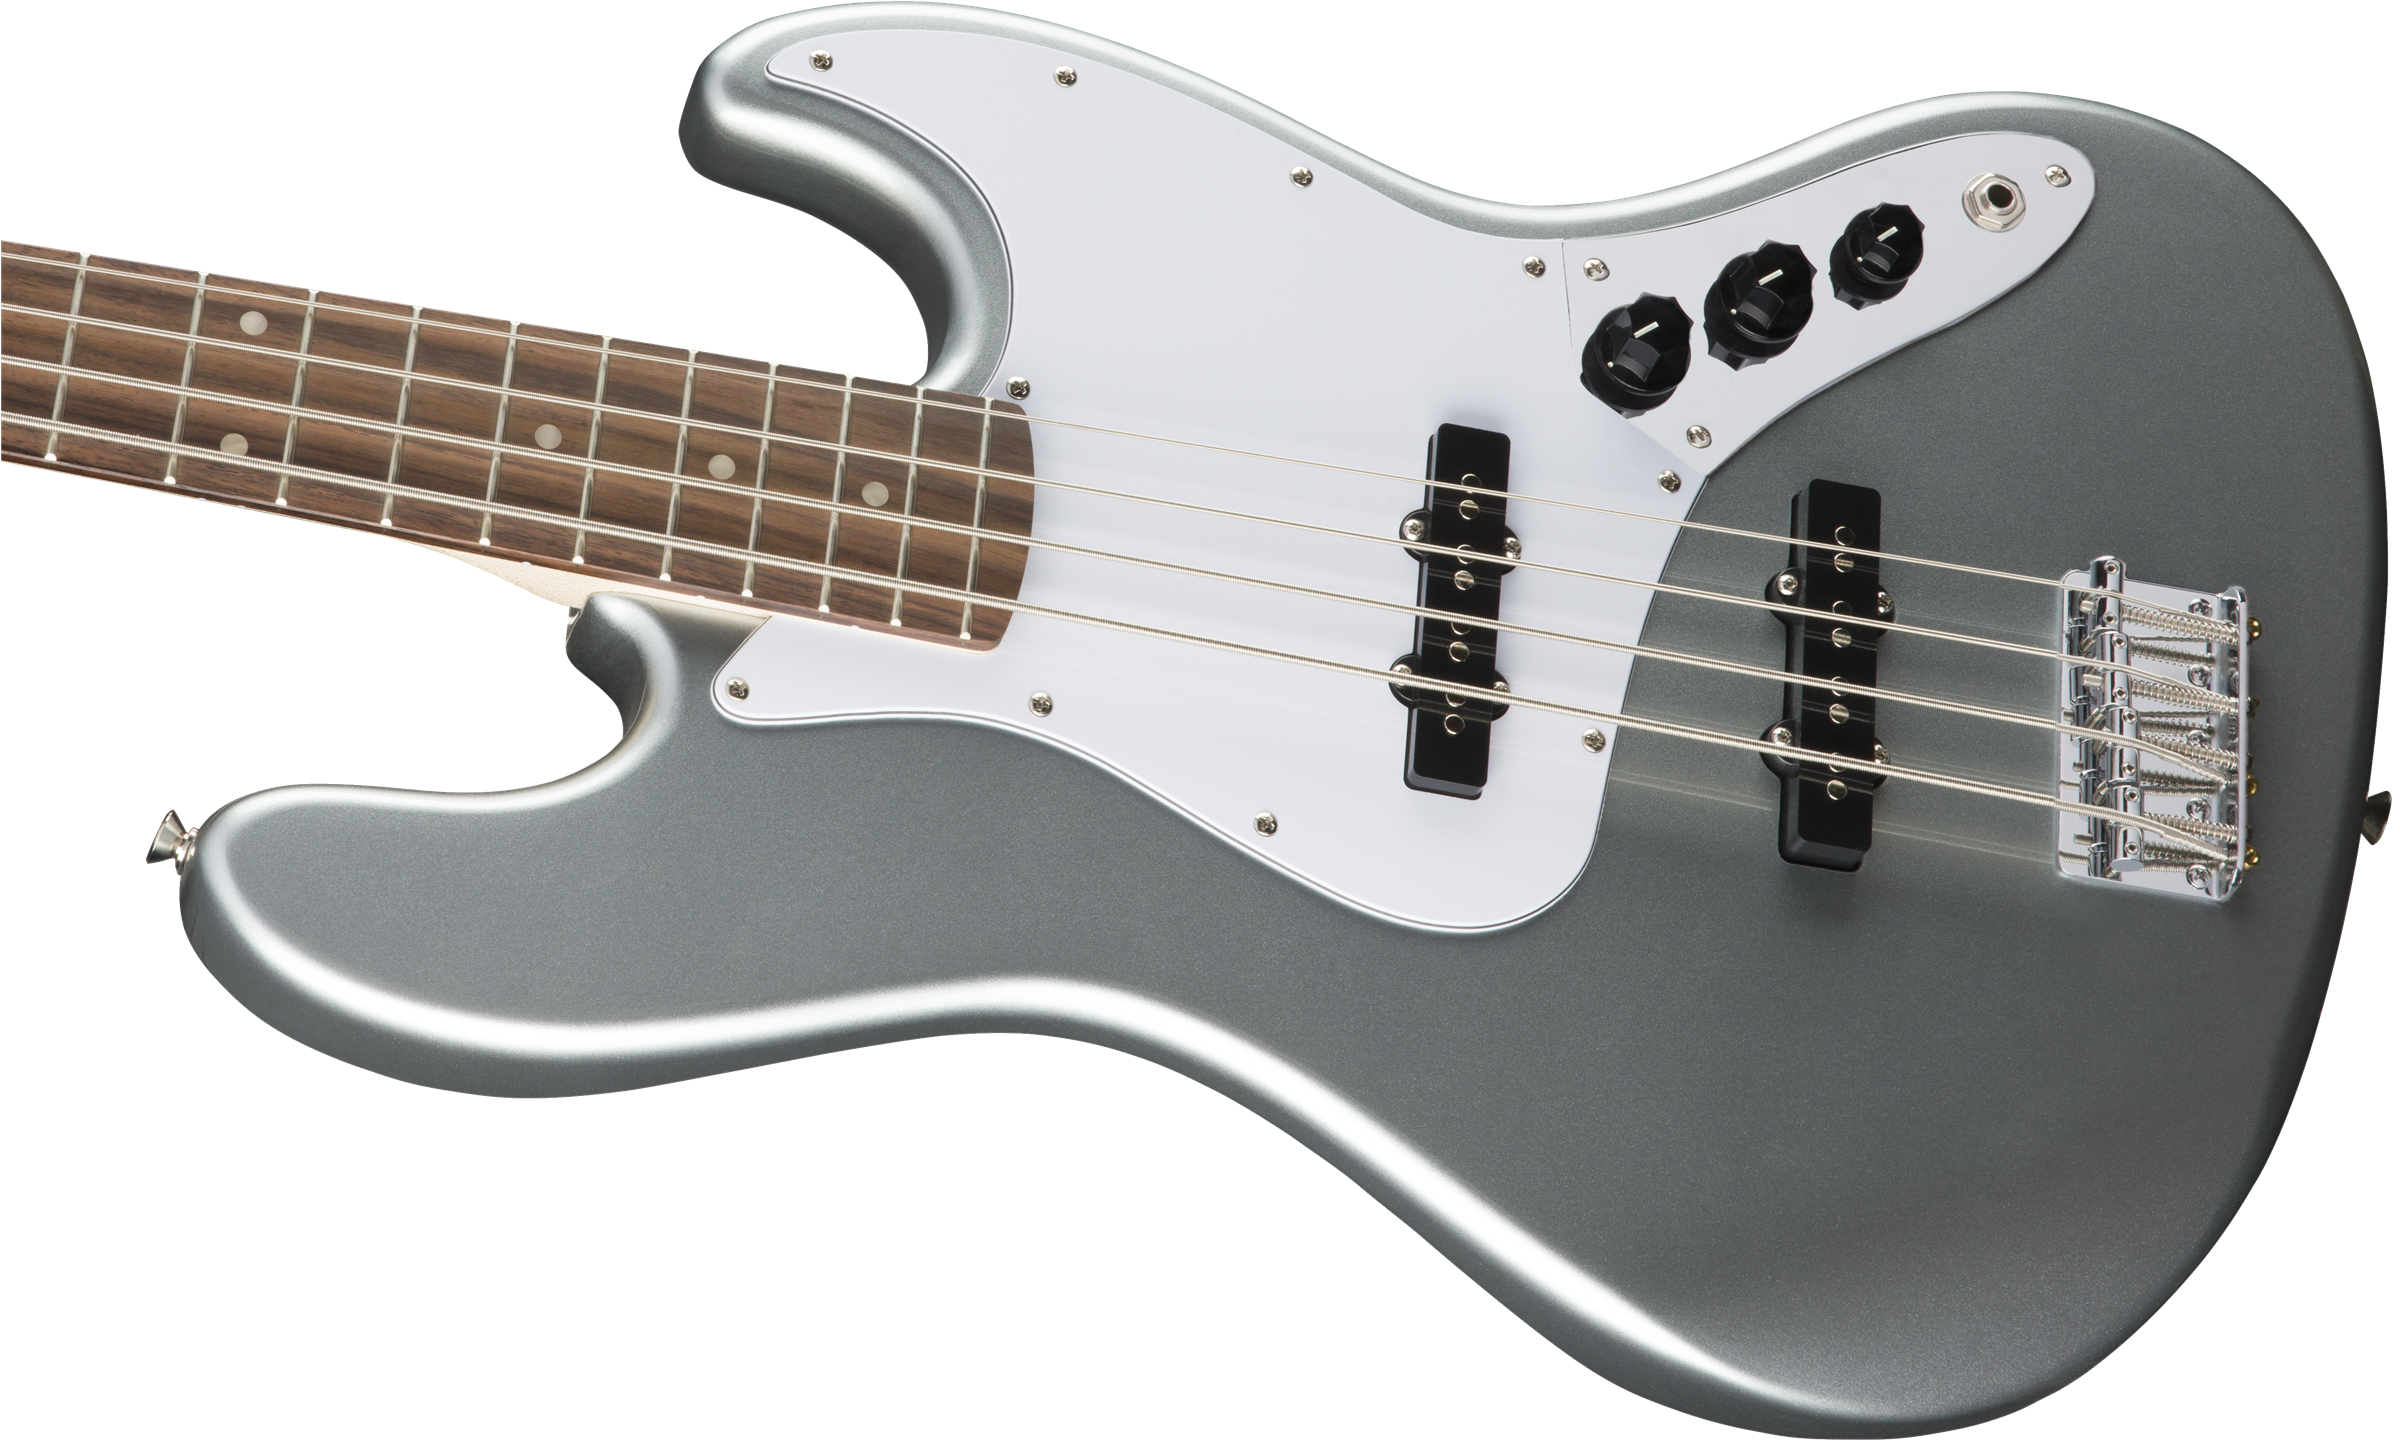 Squier Affinity Series Jazz Bass, Slick Silver 0370760581